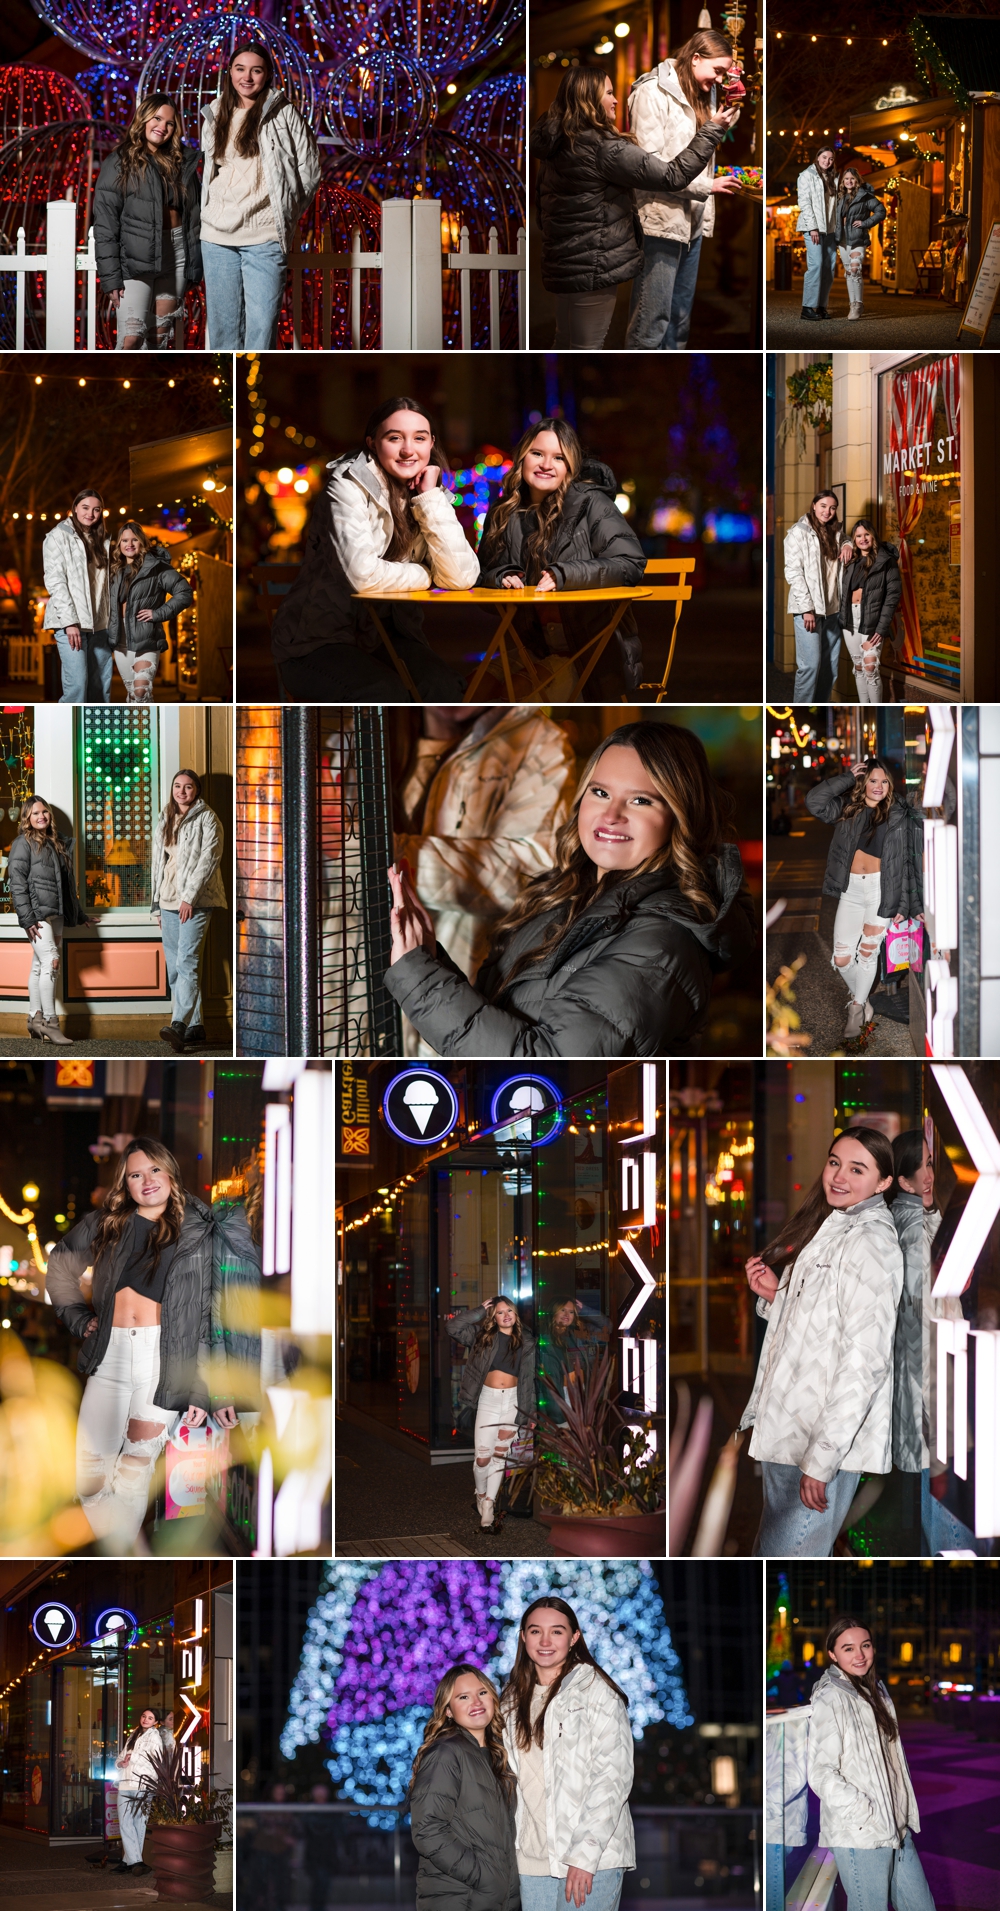 Images of two teen girls in Market Square & PPG Plaza at night during the holidays.